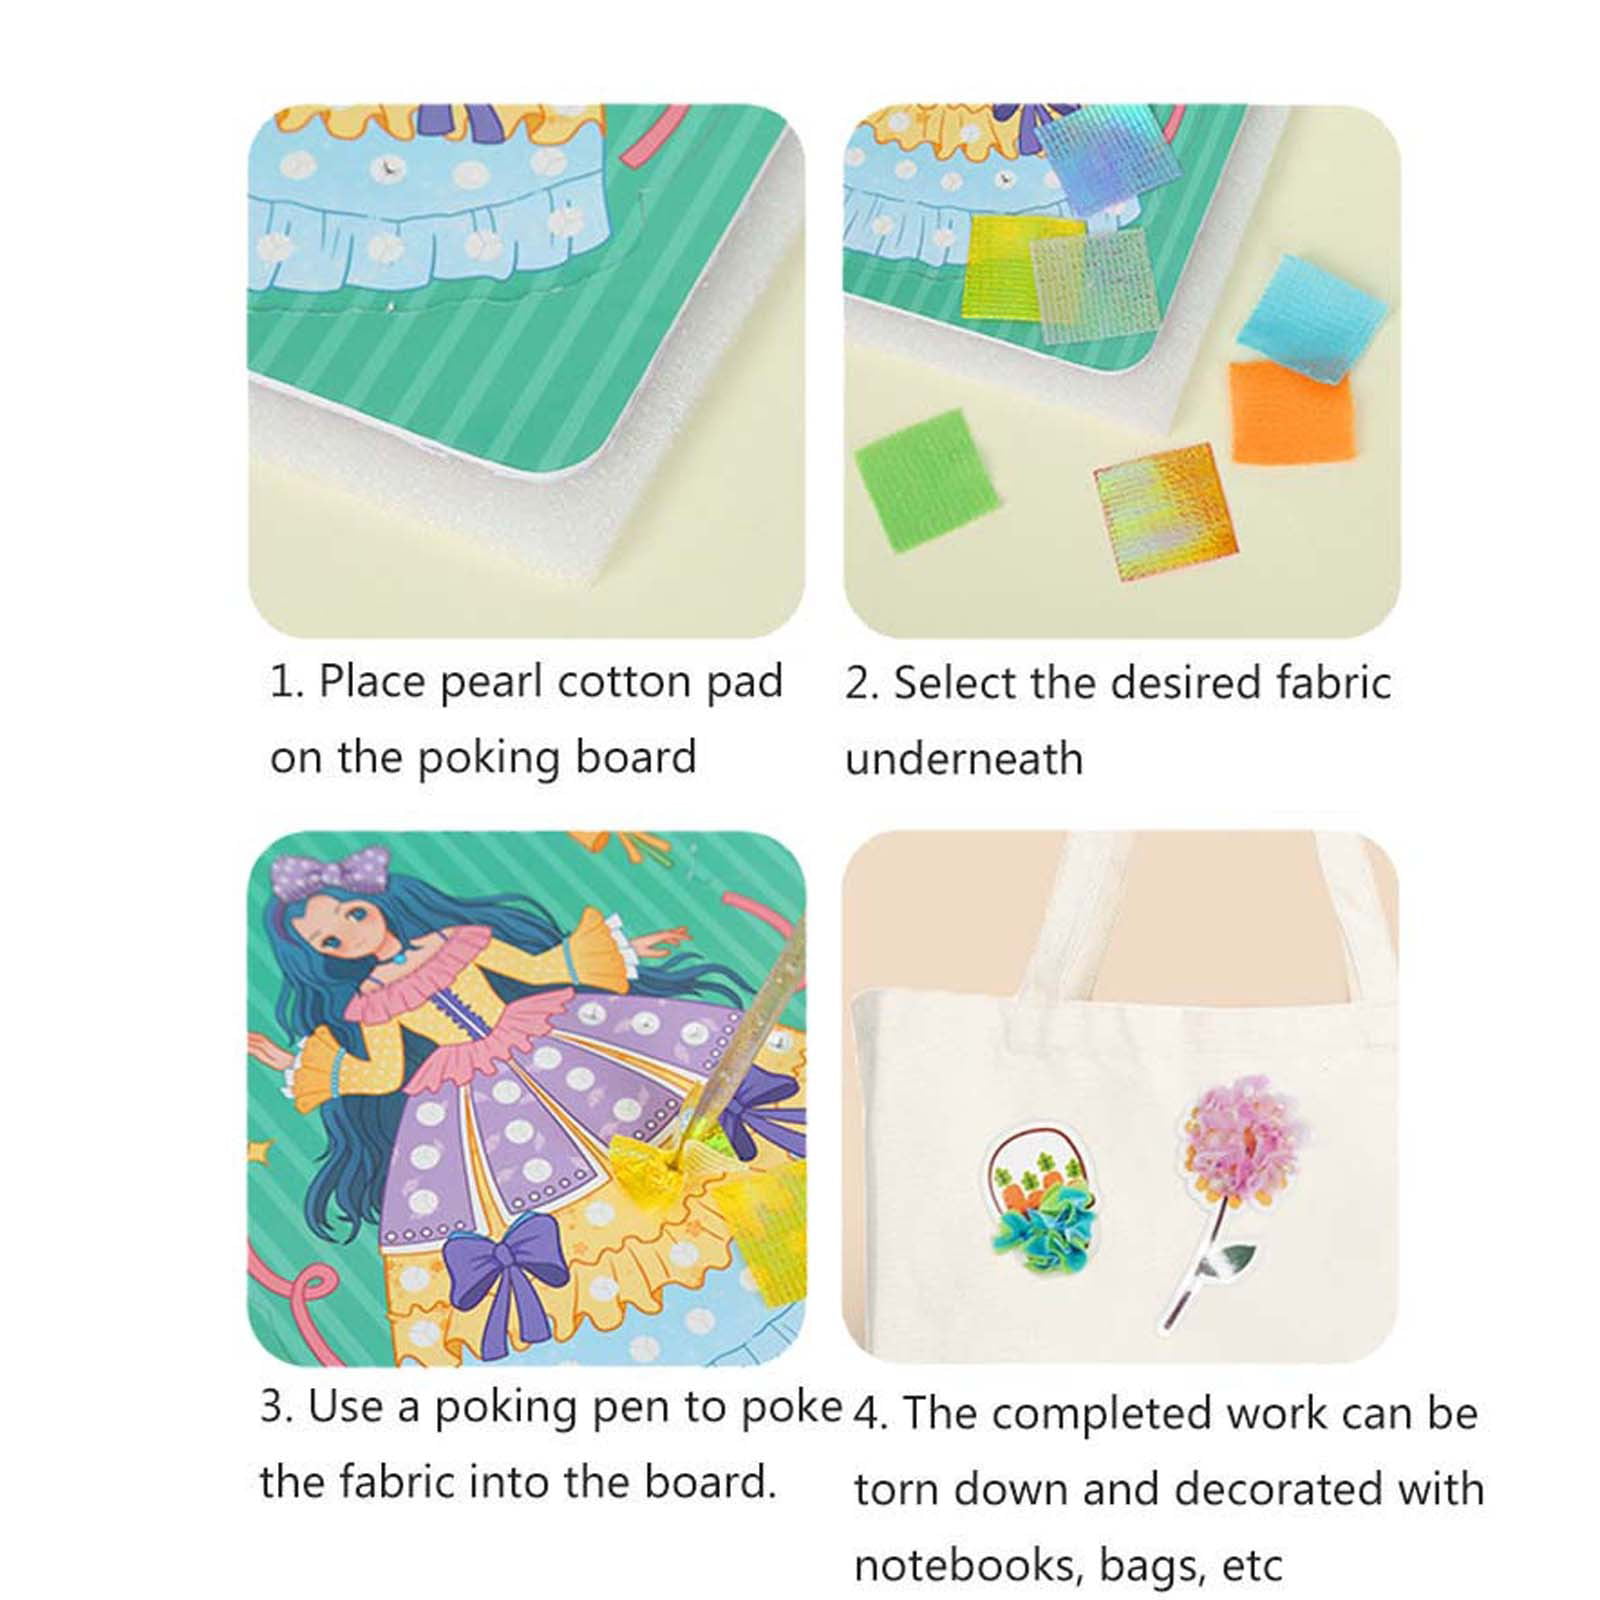 Creative Puzzle Puncture Painting Crafts For Girls Ages 8-12, Poke